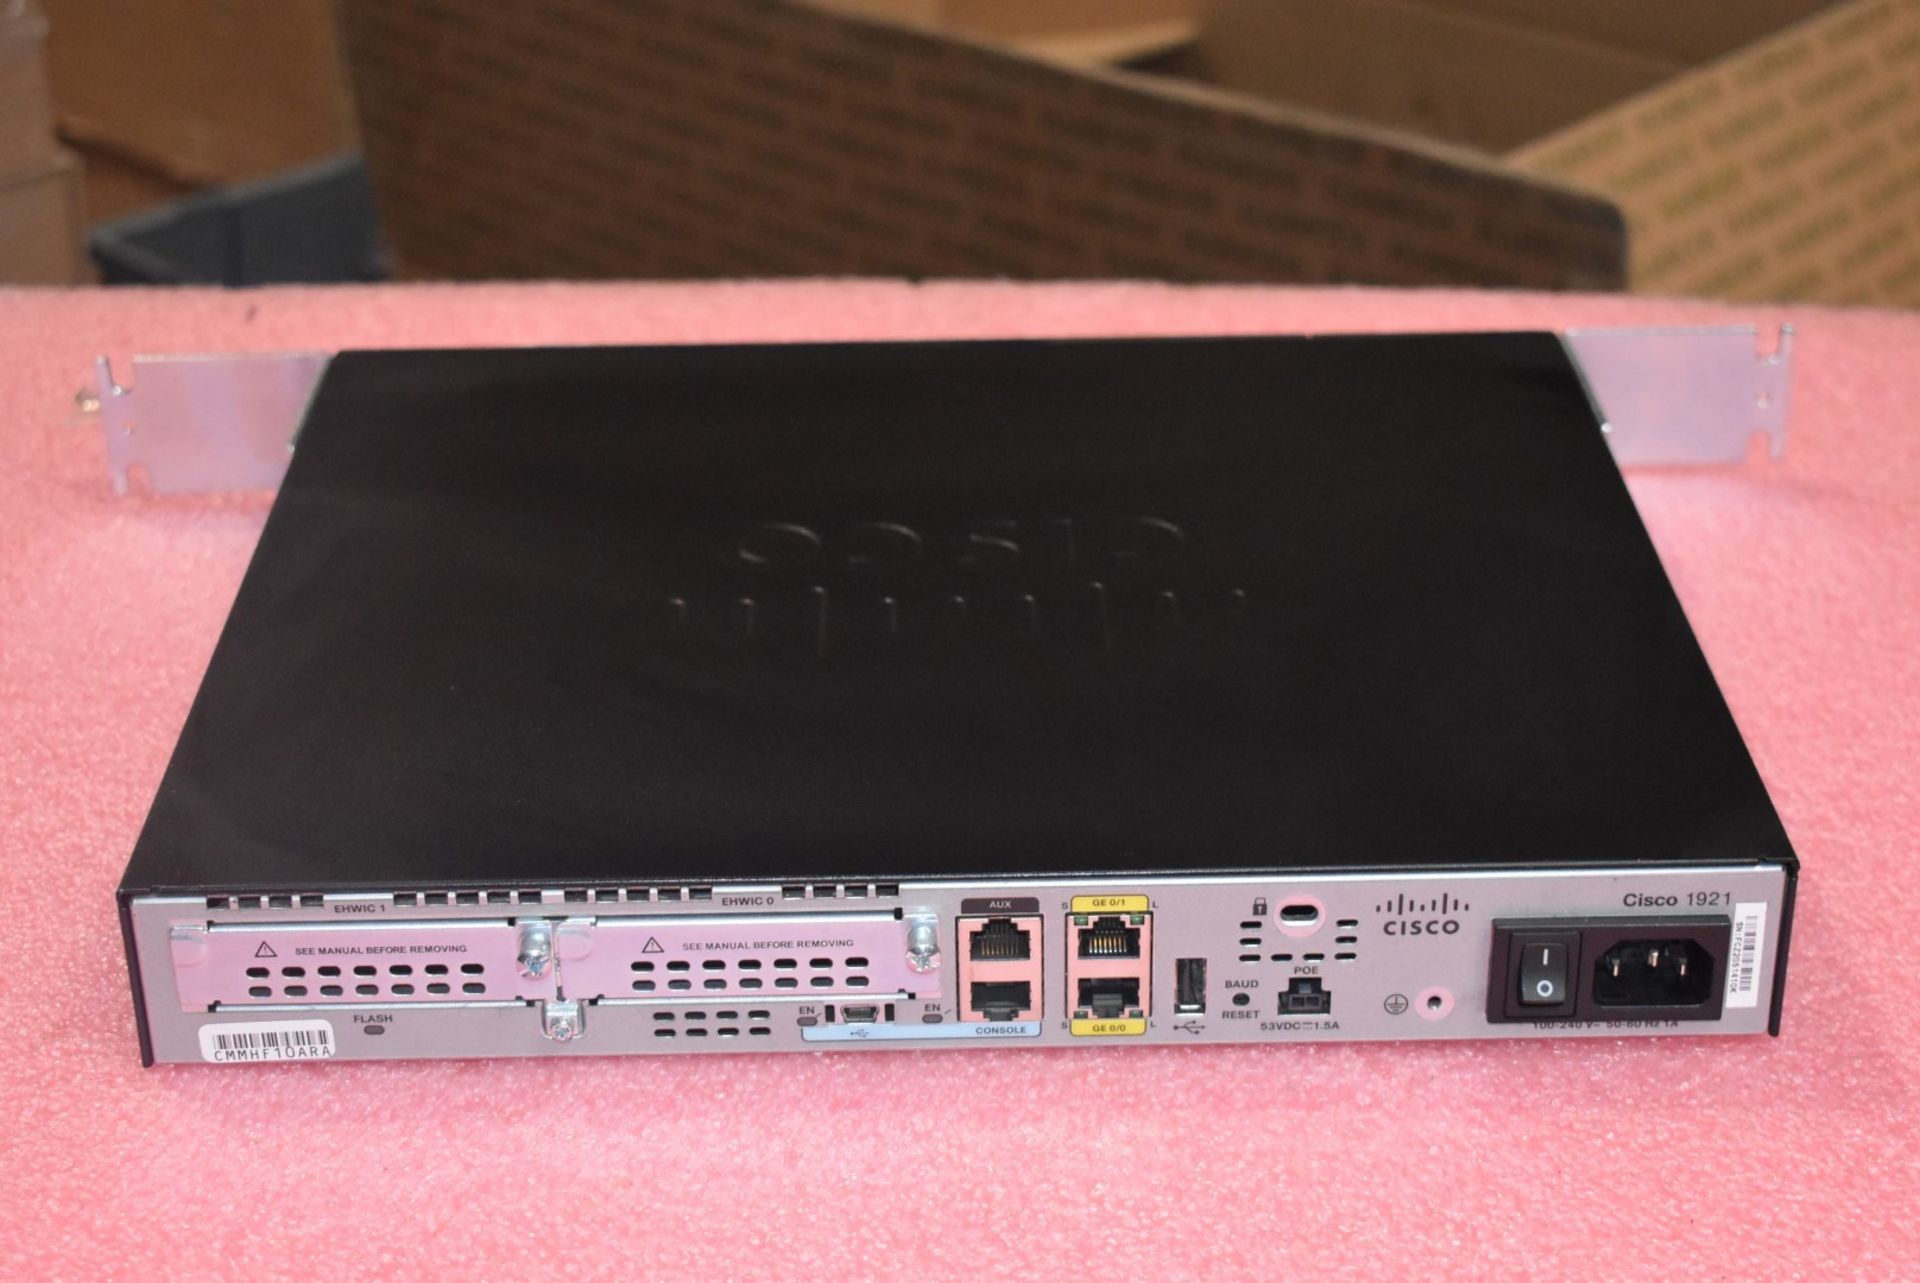 1 x Cisco 1921 Series Integrated Services Router - Image 4 of 4